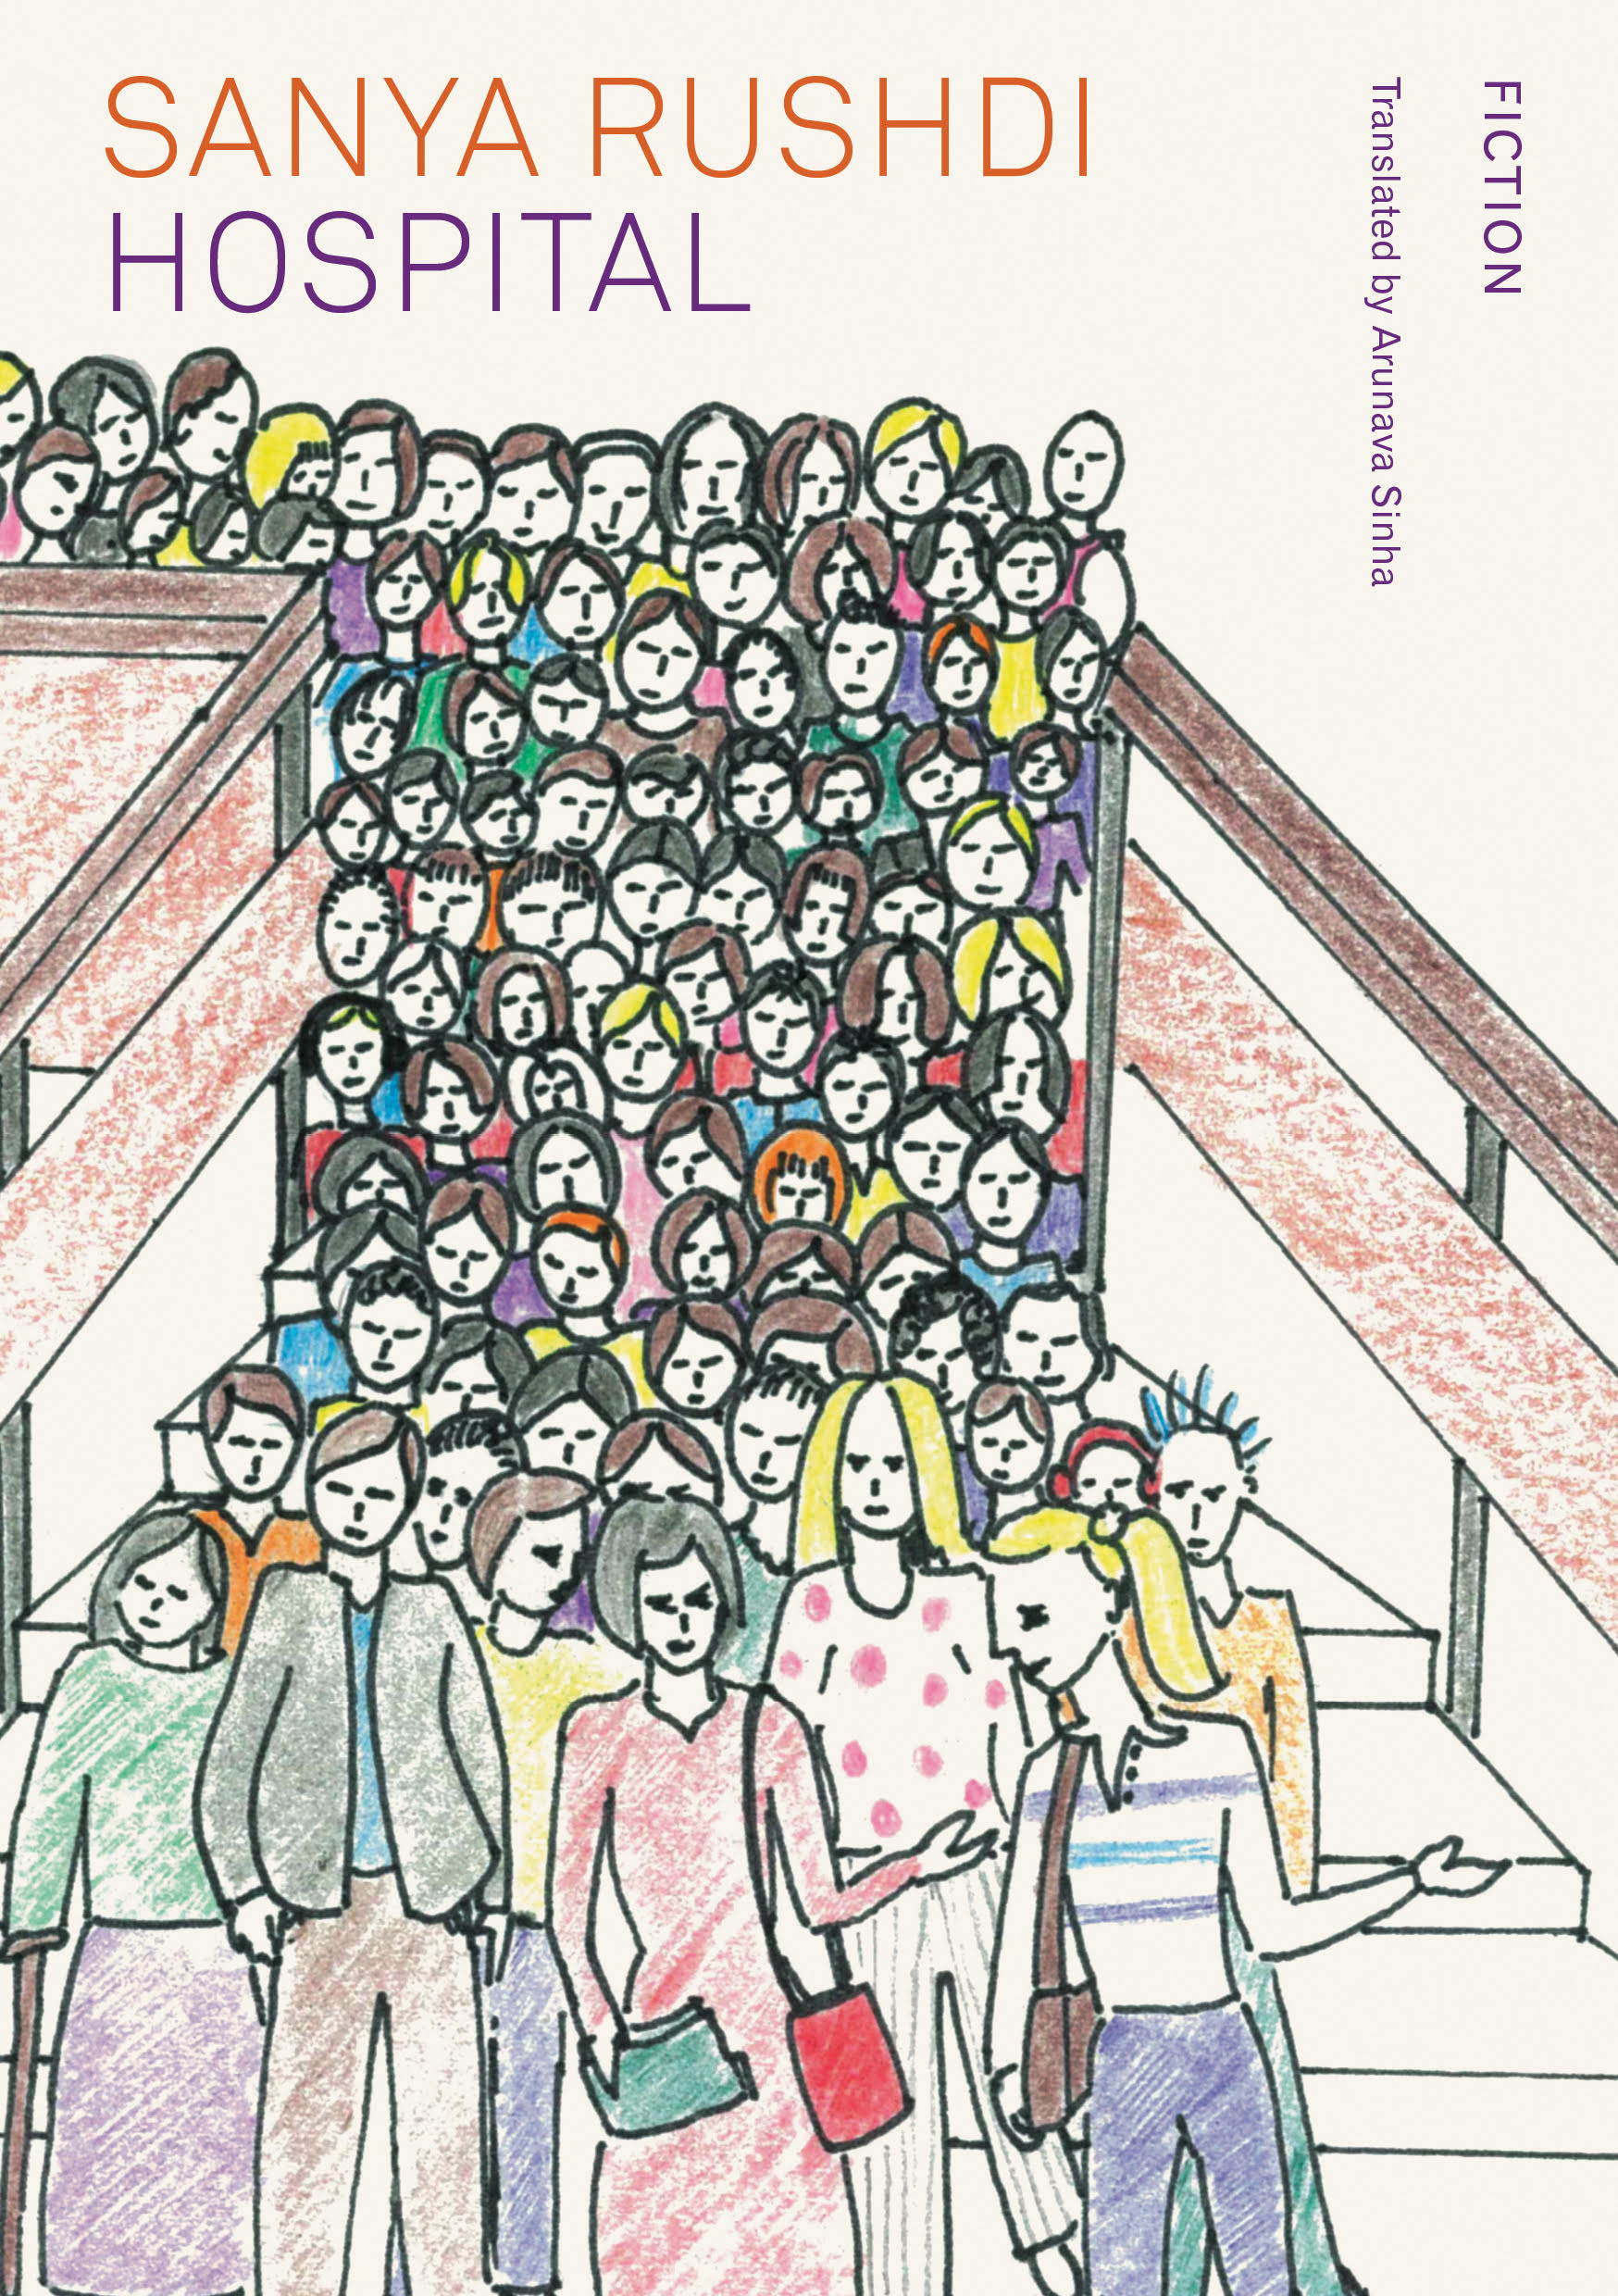 A book cover showing an illustration of a crowd of people descending a staircase